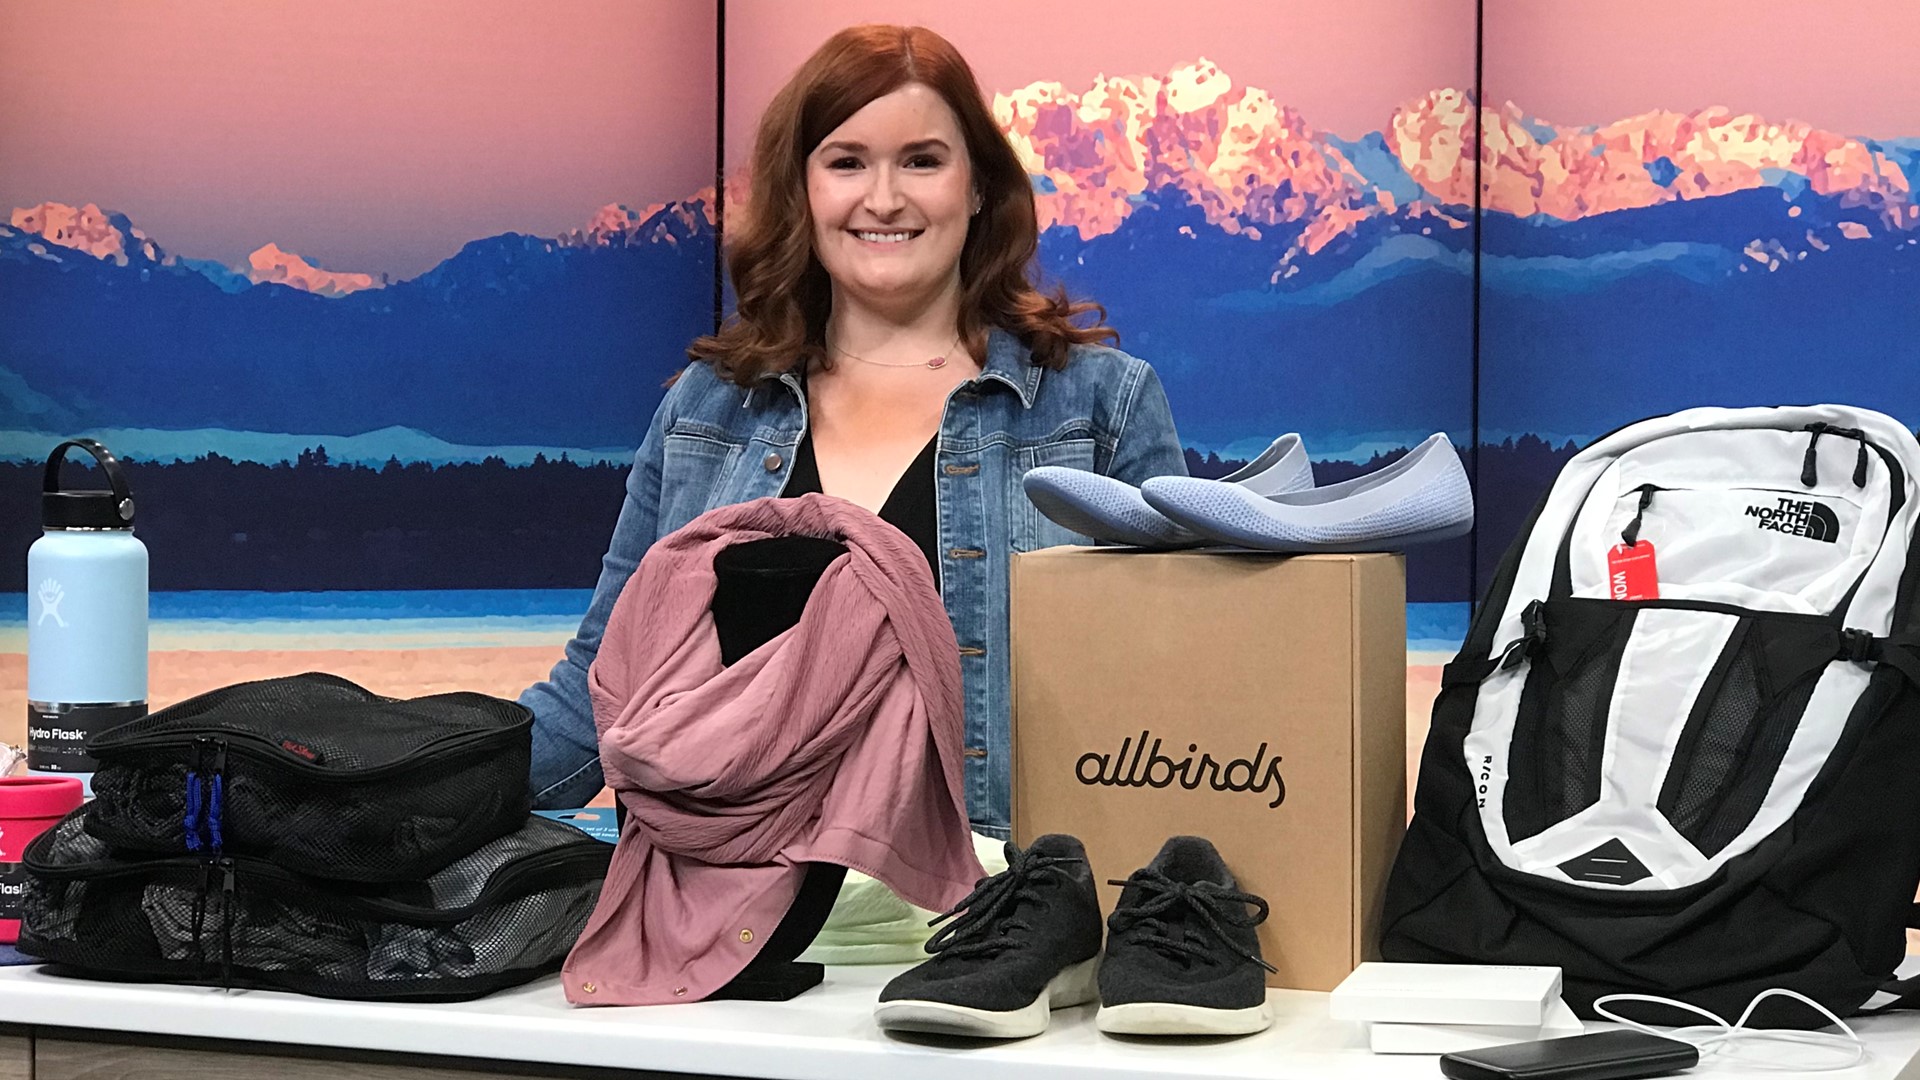 Seattle travel blogger Kate Retherford has nearly 50,000 followers and has traveled the world.  Here are her expert recommendations on what to pack.